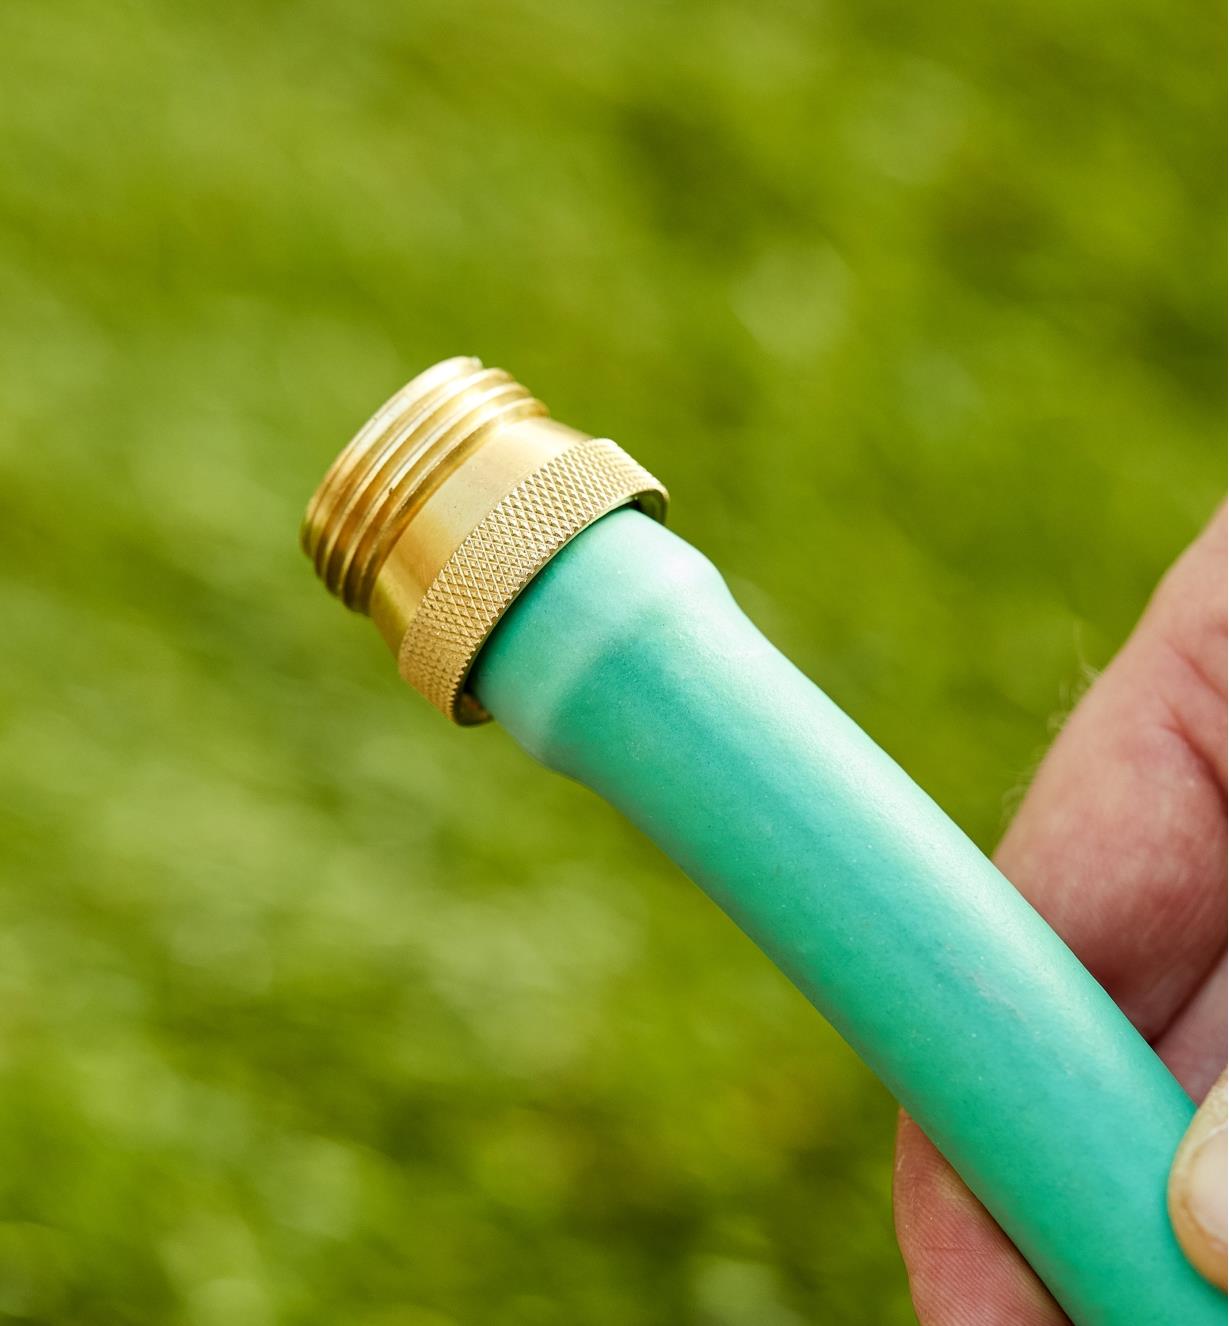 The male brass hose coupler installed on a hose end